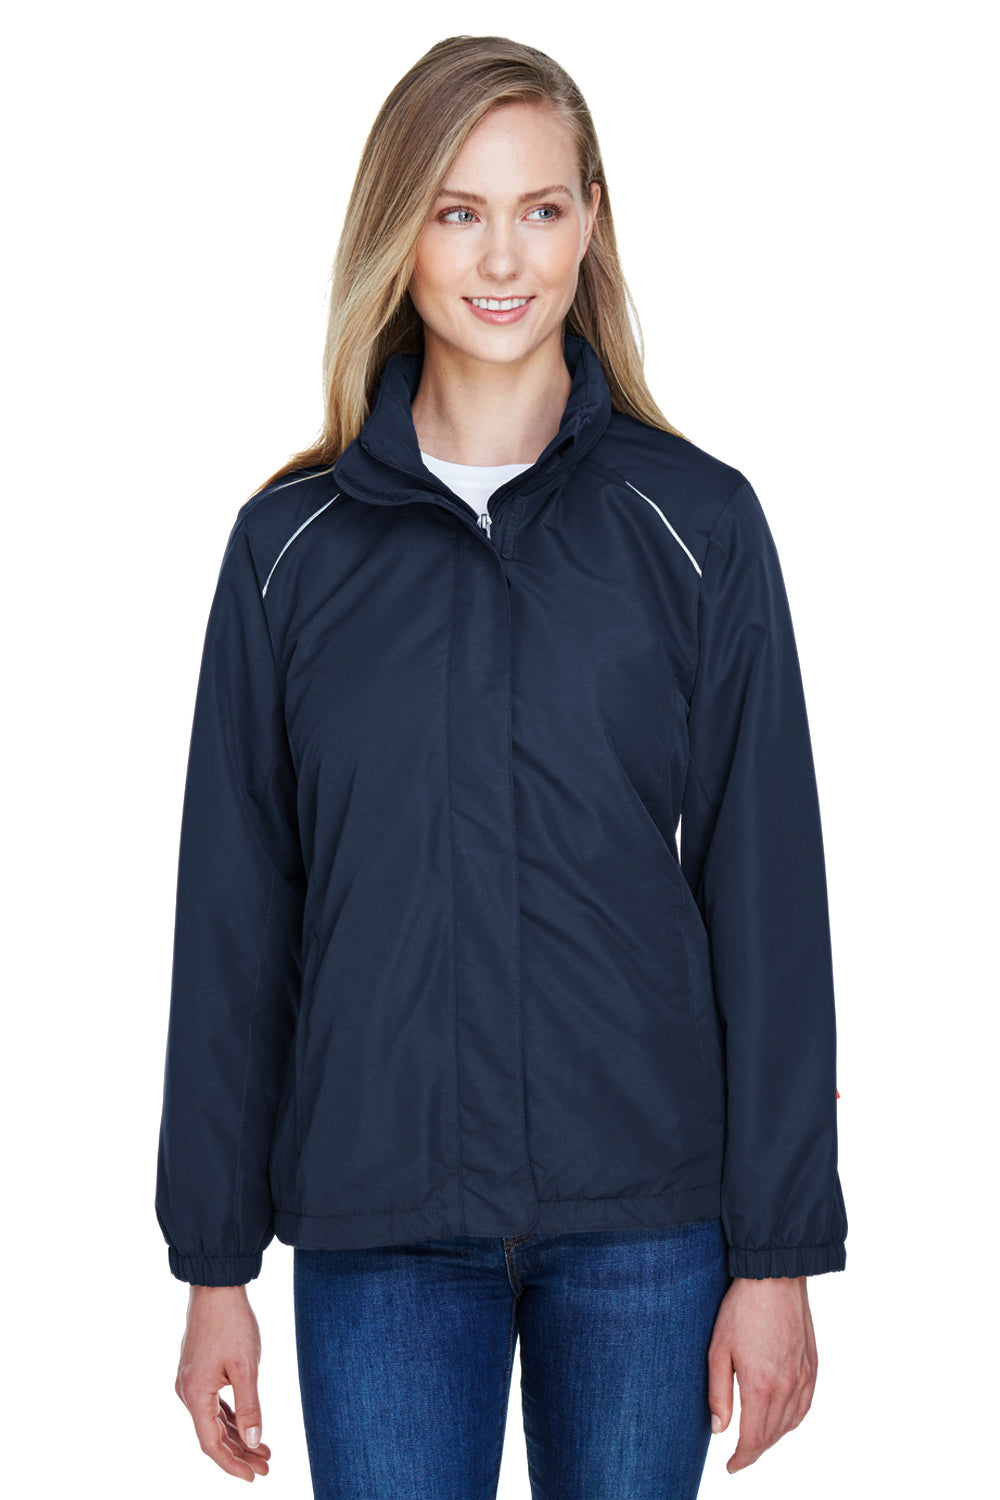 Core 365 78224 Womens Profile Water Resistant Full Zip Hooded Jacket Navy Blue Front